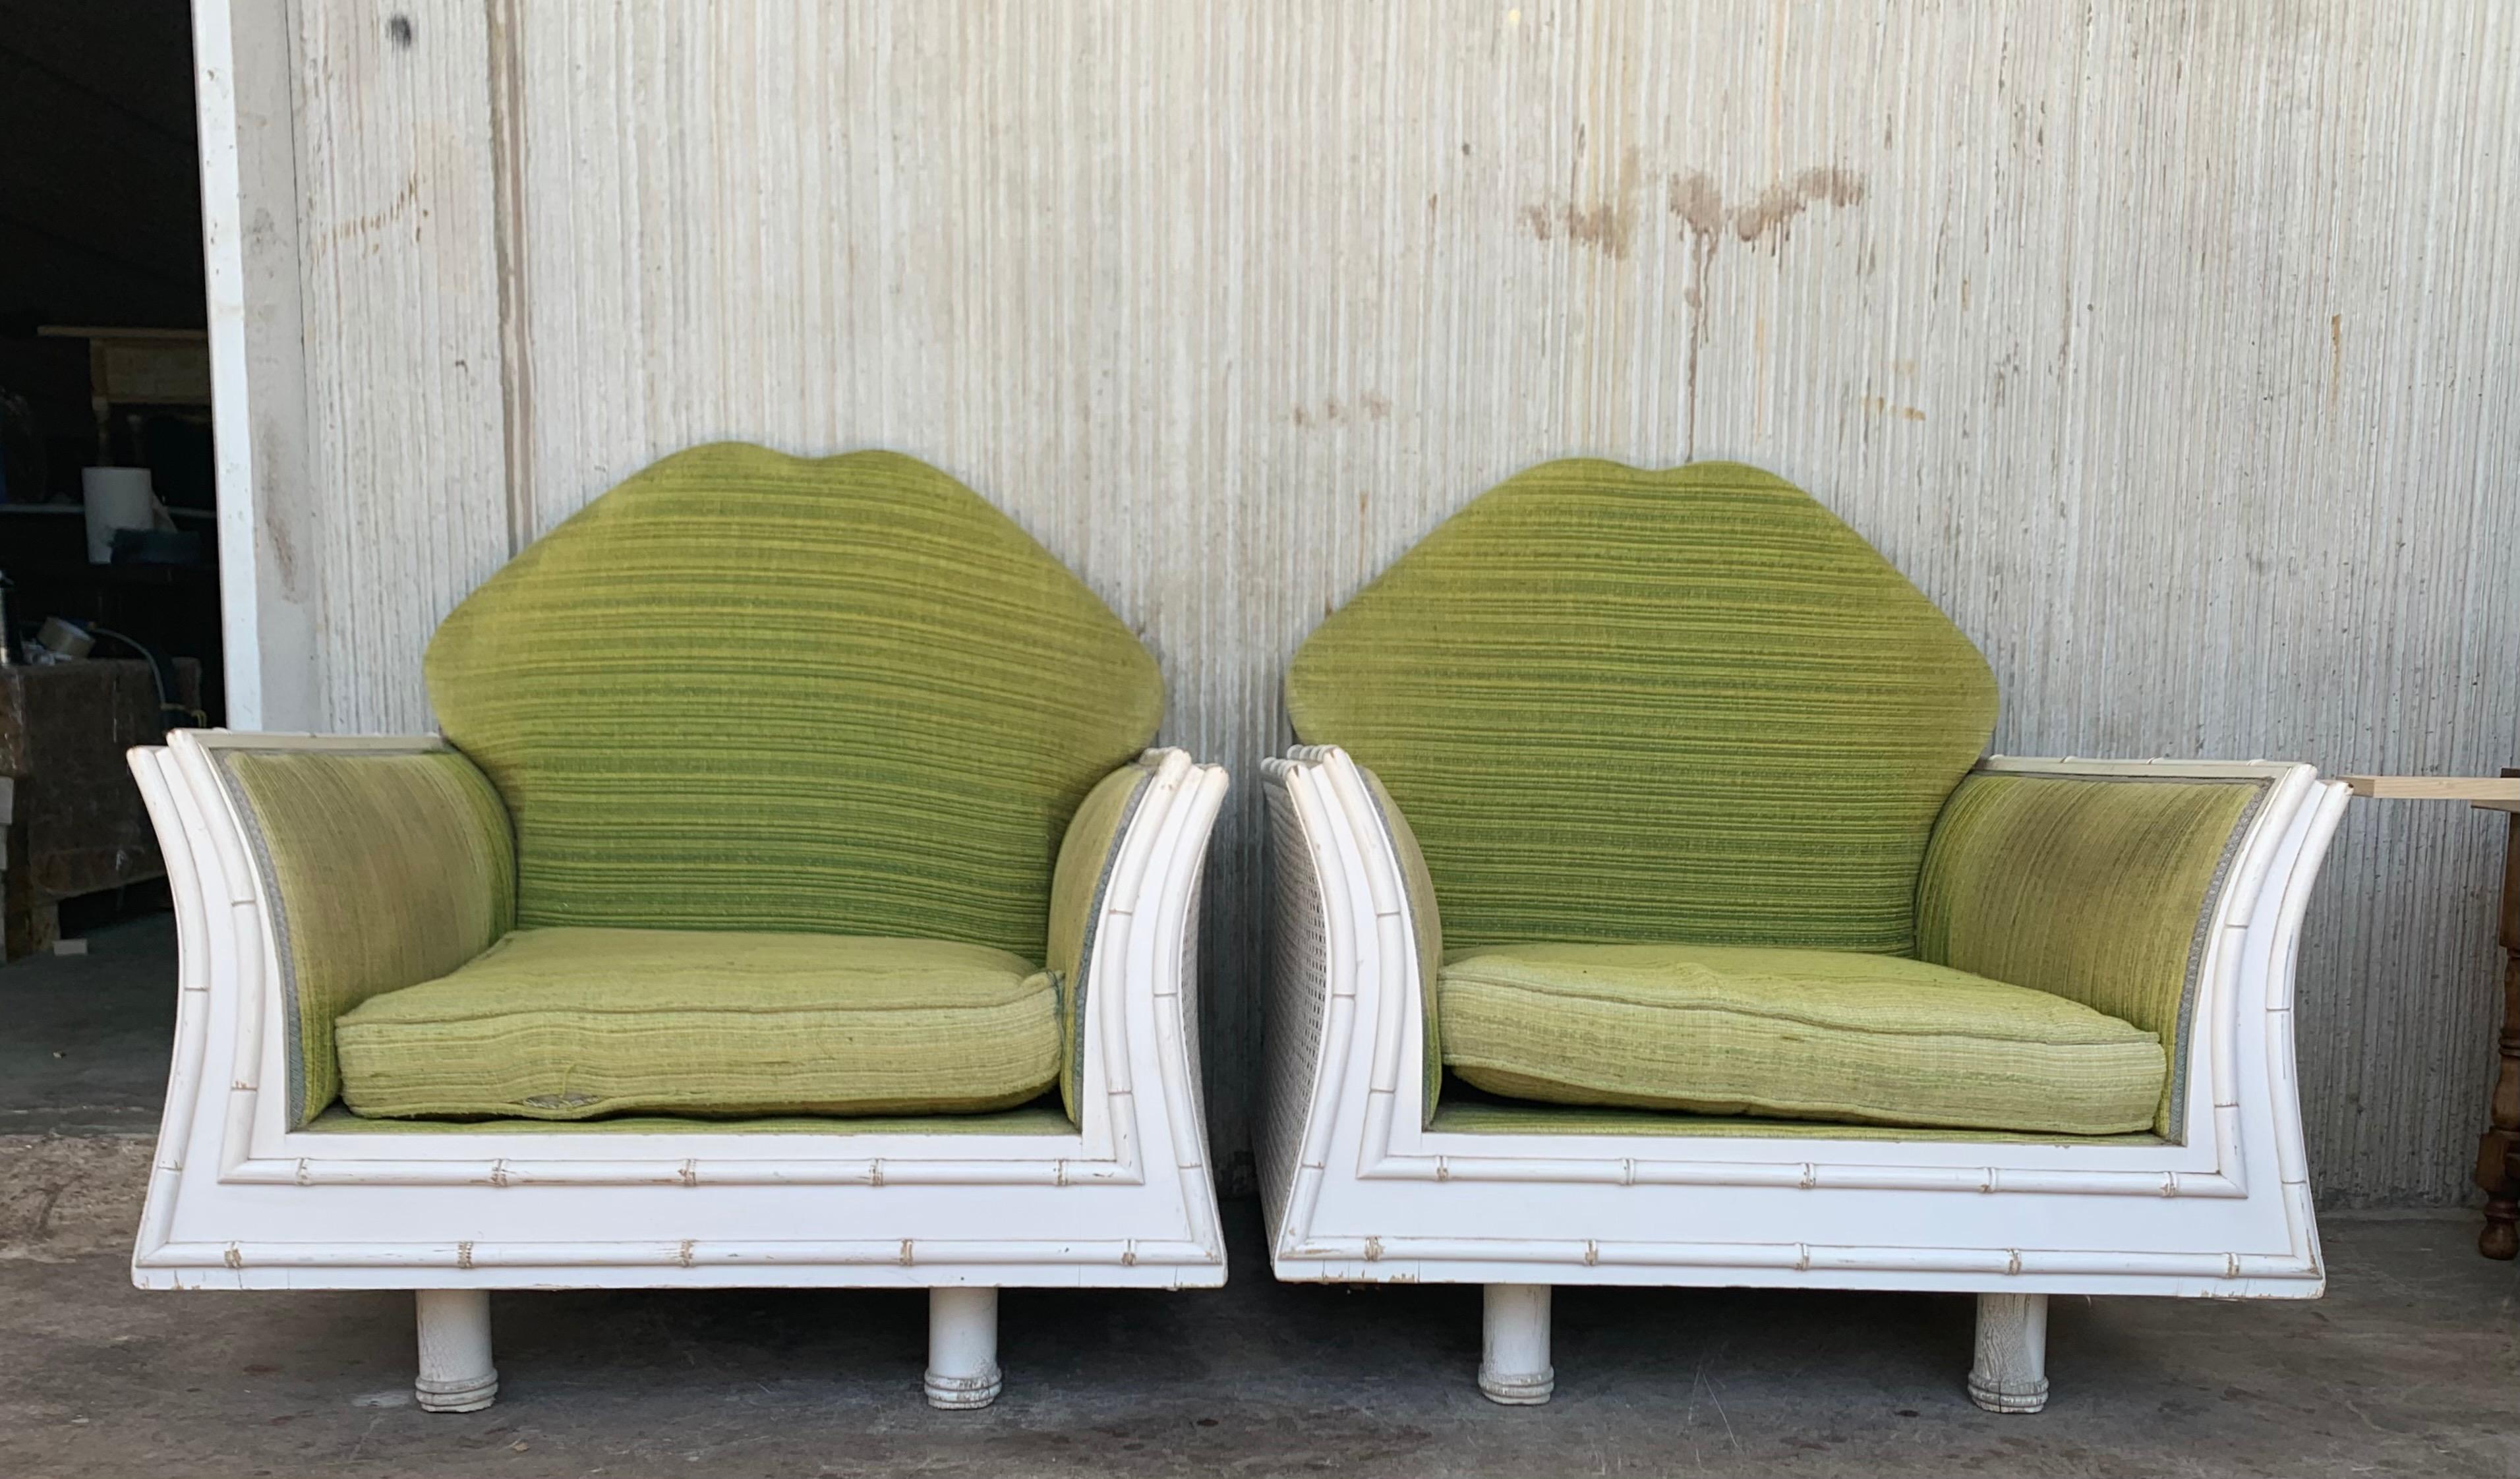 Pair of Hollywood Regency, white lacquer faux bamboo lounge chairs.

We will ship the piece perfectly restored
I needs a reupholstery.